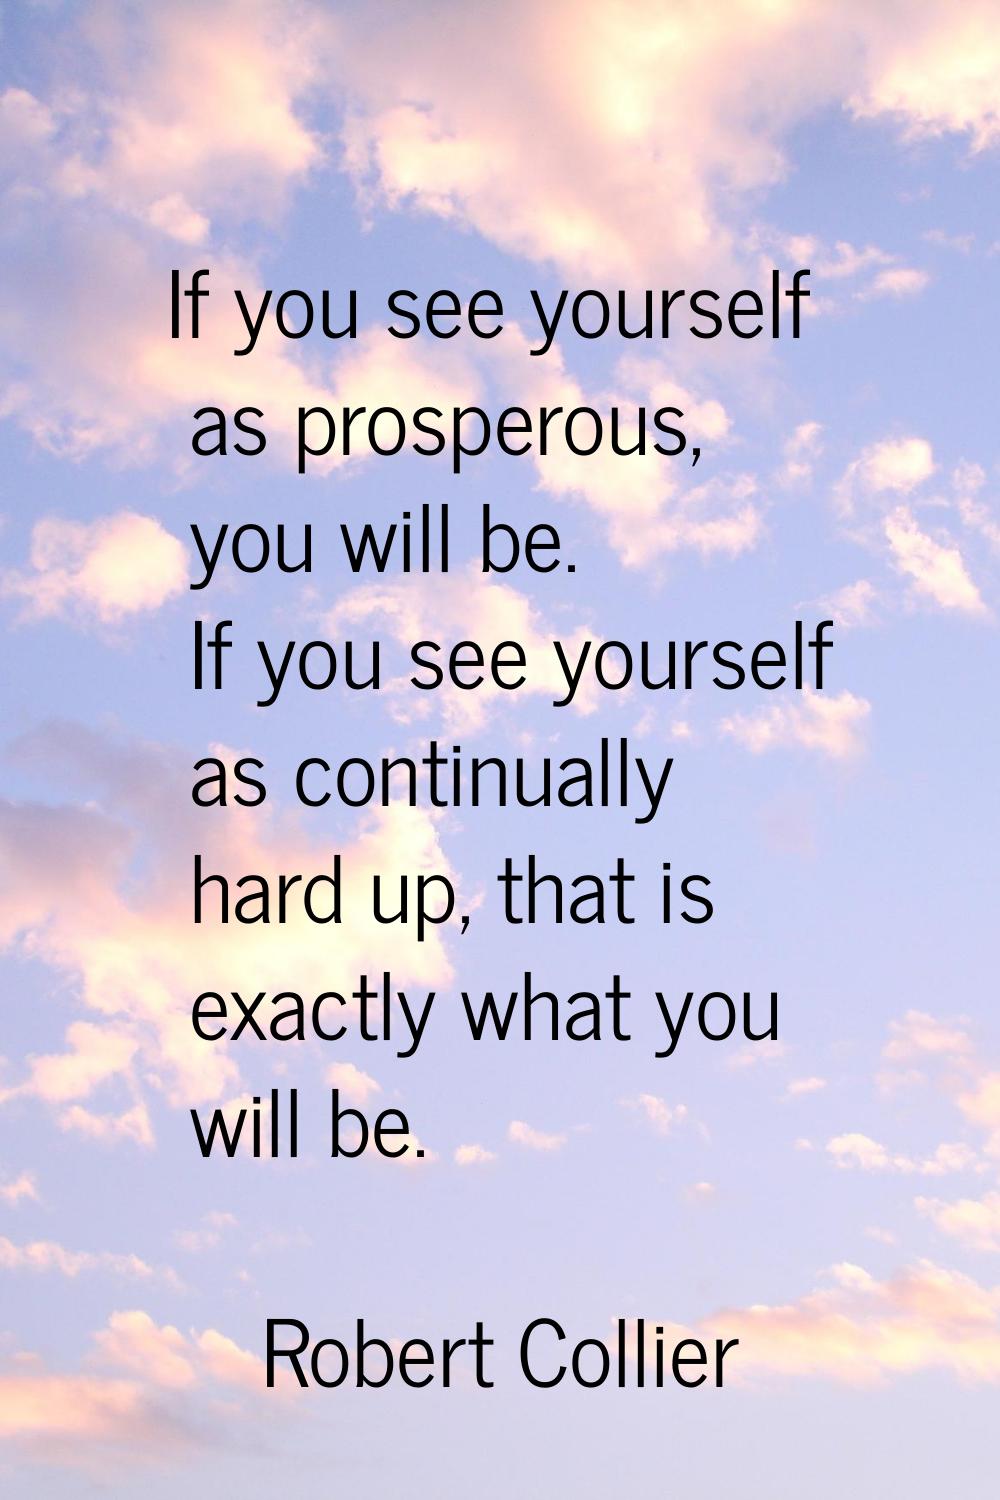 If you see yourself as prosperous, you will be. If you see yourself as continually hard up, that is